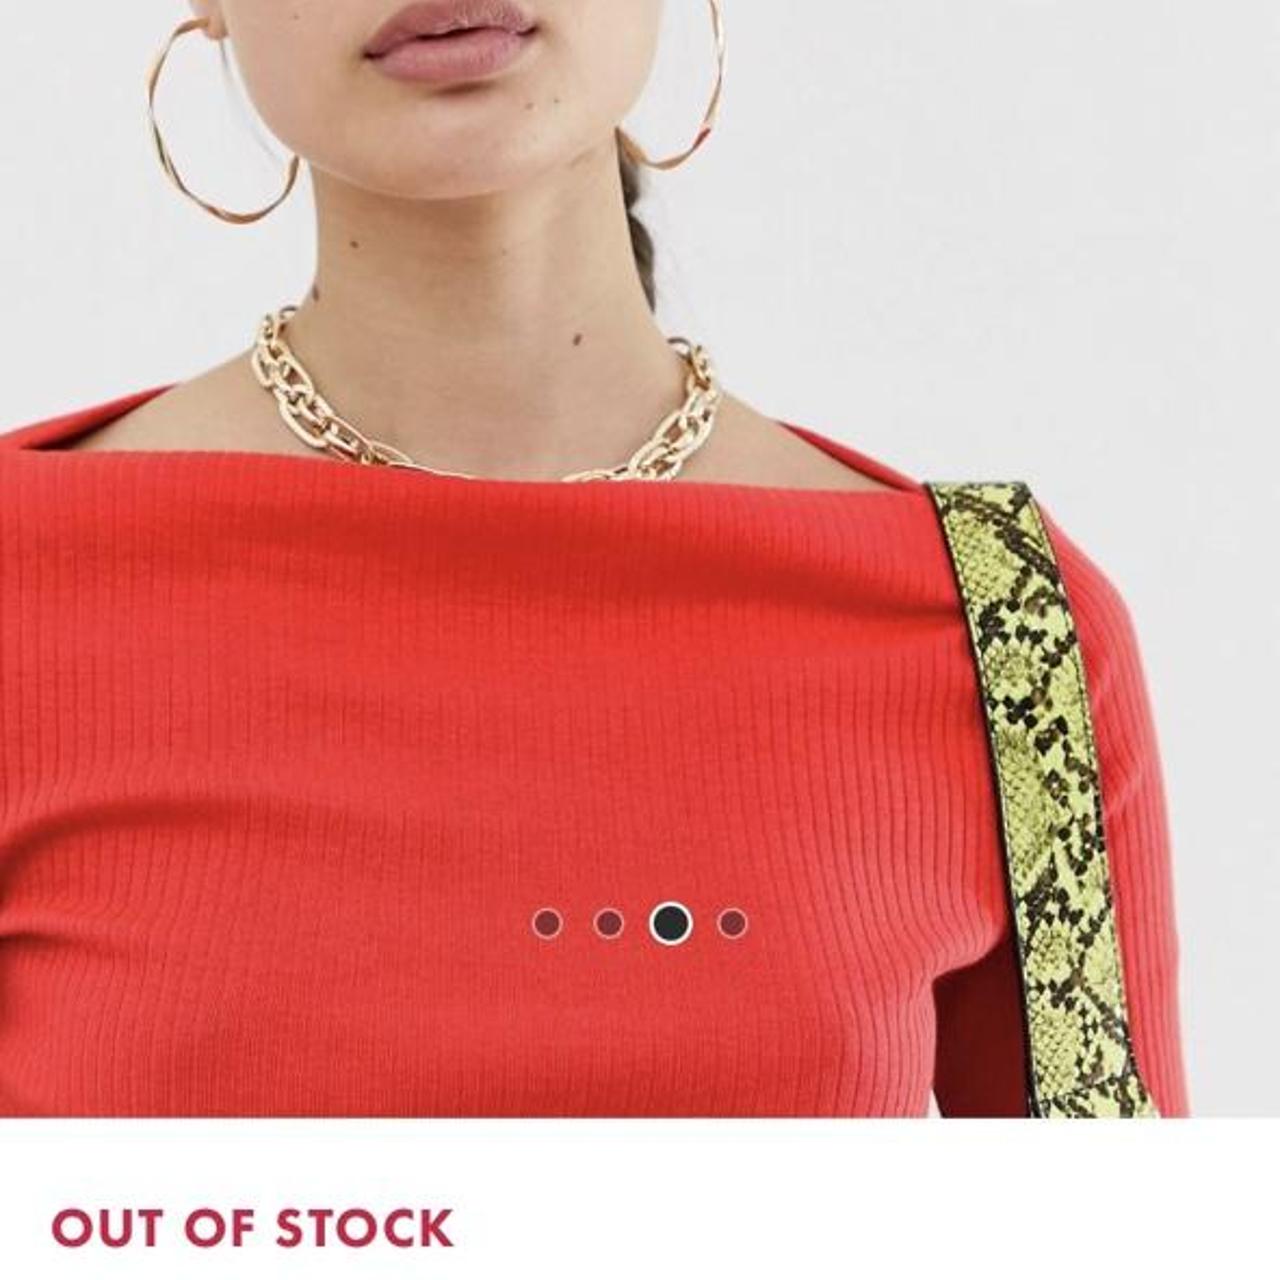 Product Image 3 - .
🍒 River island red shirt